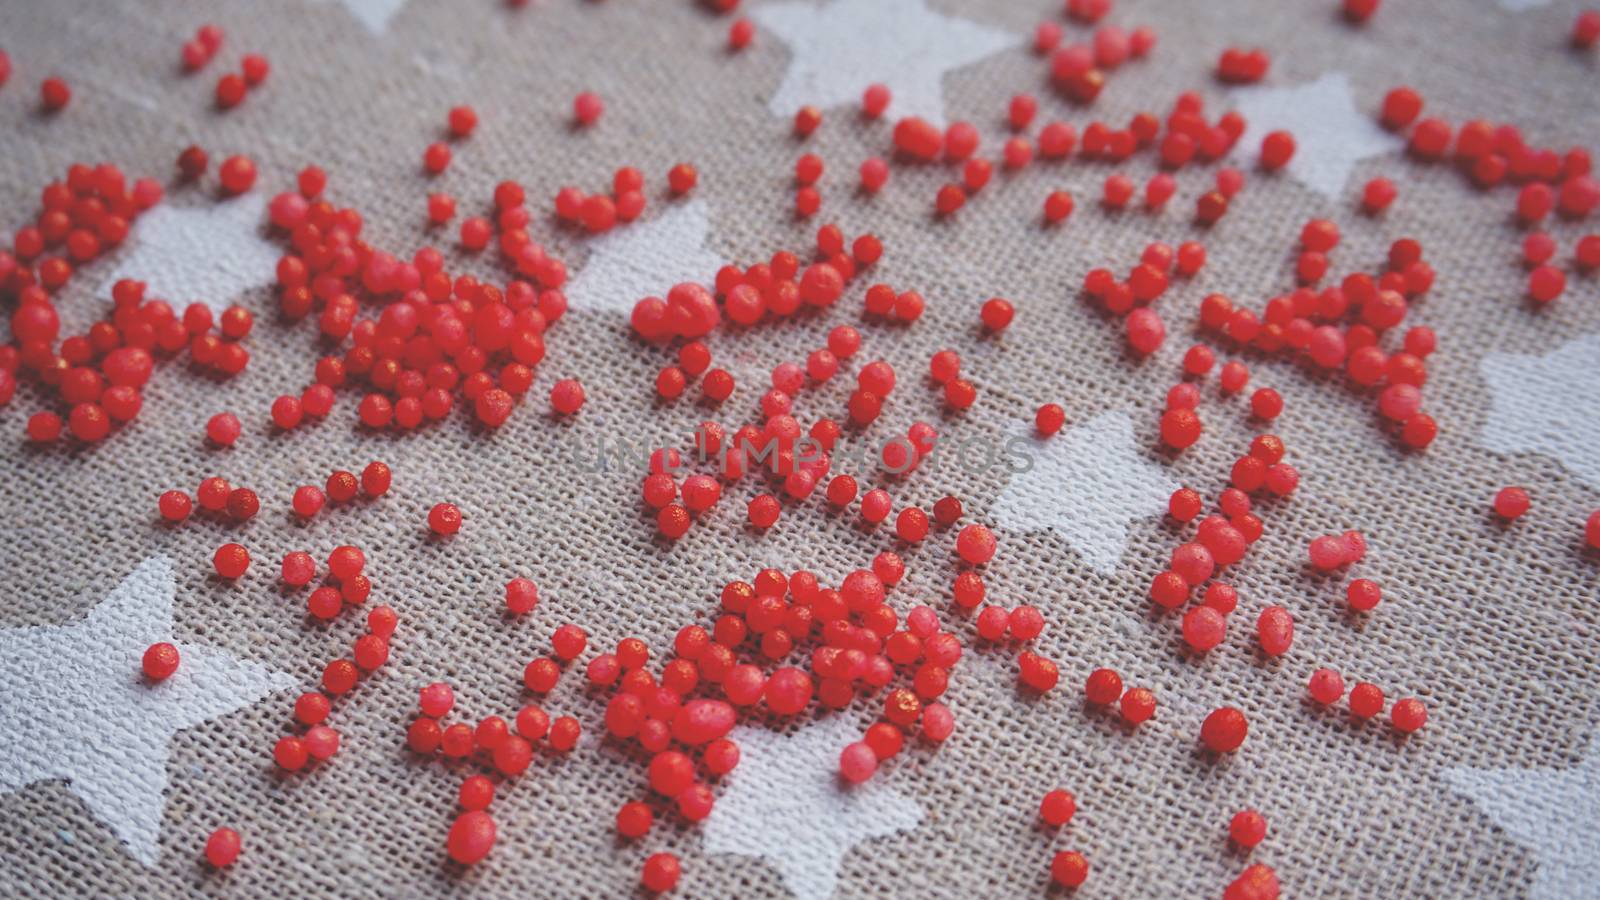 Red balls. Small gel ball. Silica gel. Balls of red hydrogel. Crystal liquid ball with reflection. Gray Texture background.